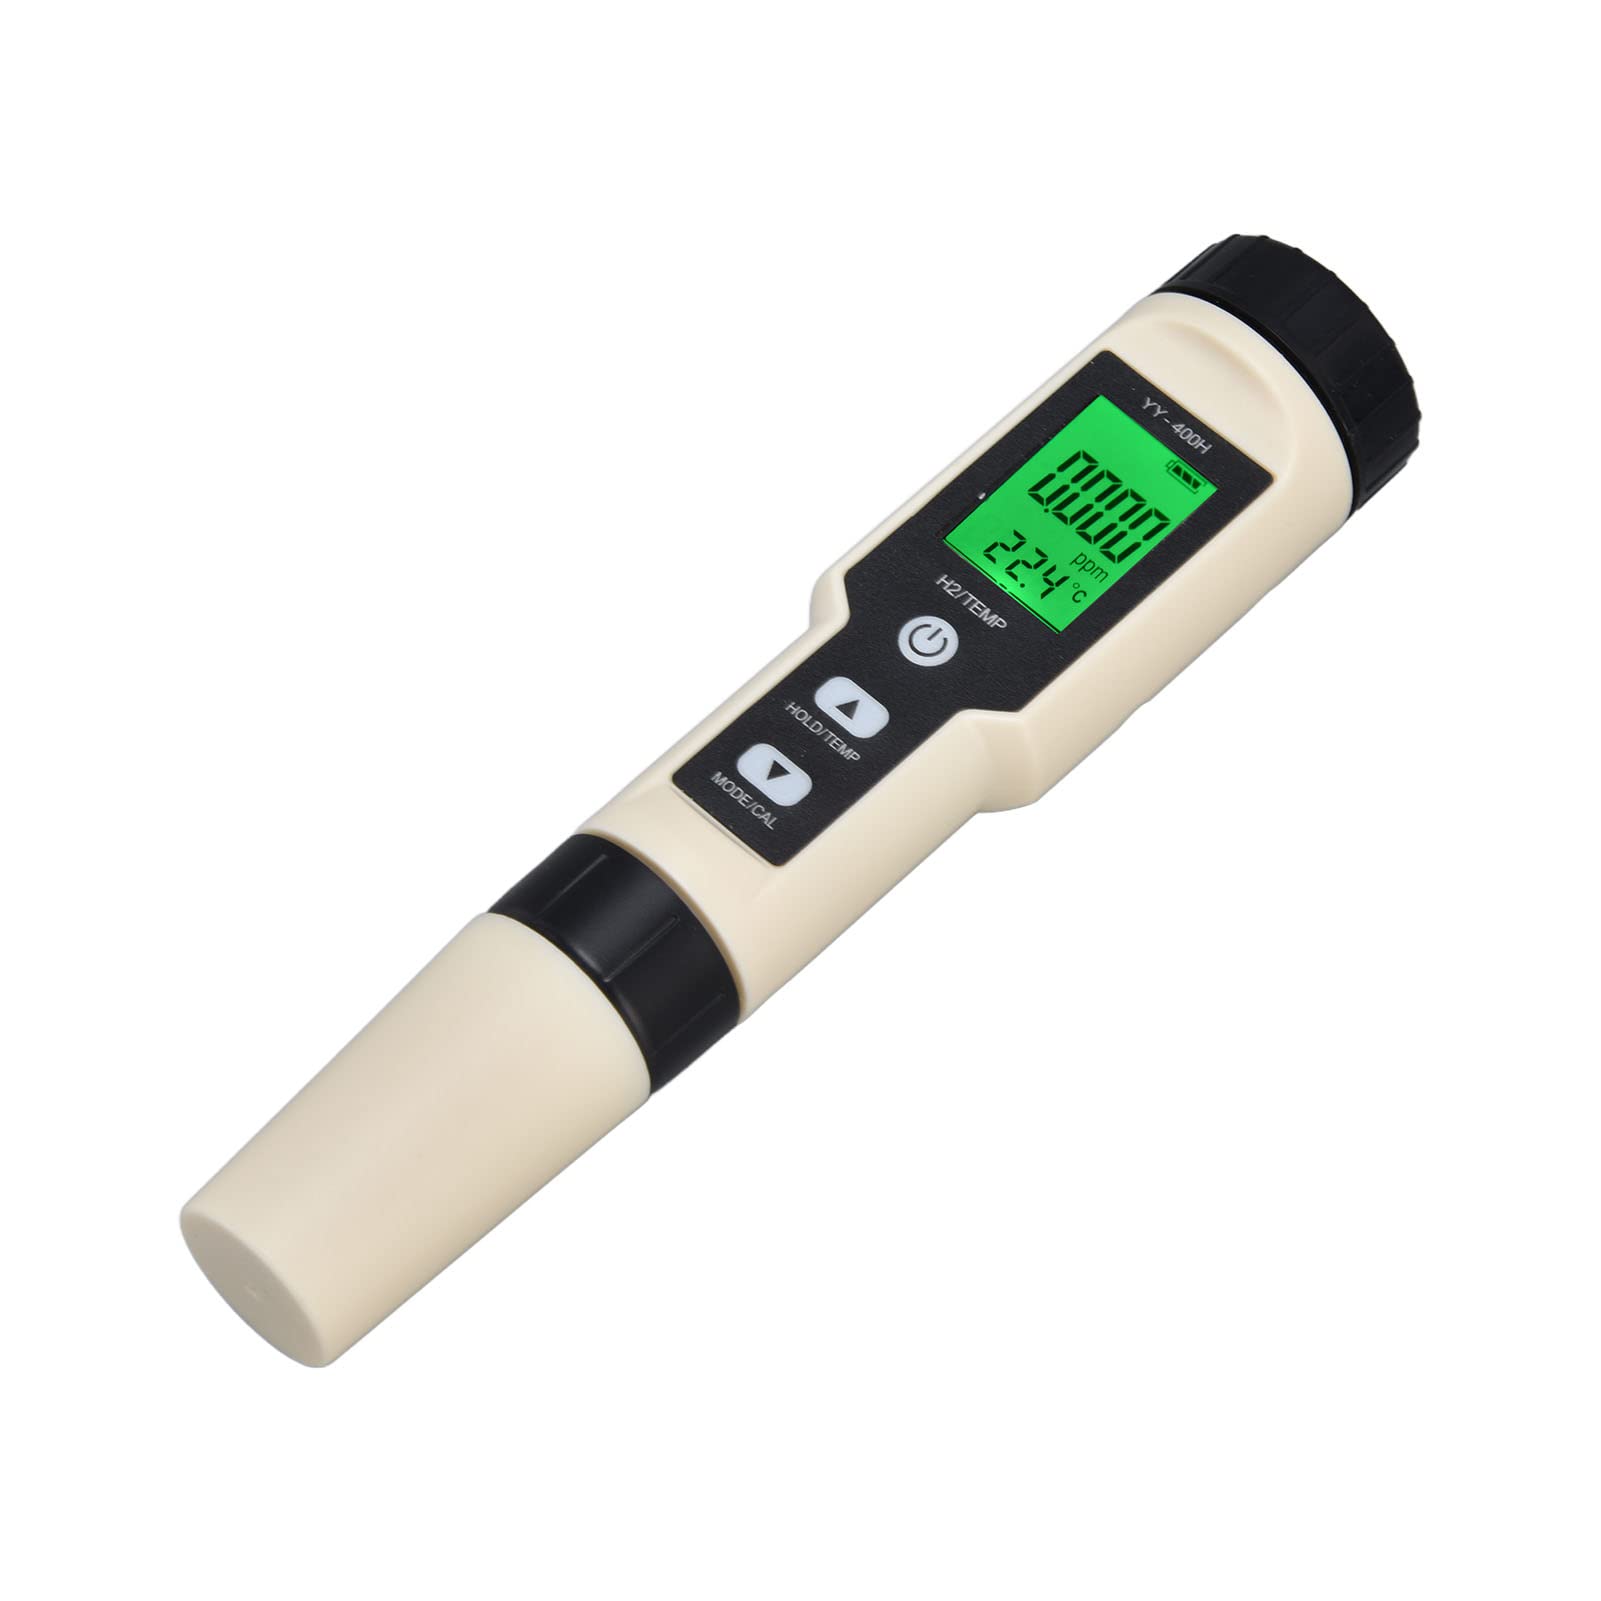 Fishawk Digital Hydrogen Meter, High Accuracy Pen Type H2 Meter Water Quality Tester with ATC, LCD PH TDS Salt PPM Temp Tester Meter for Drinking Water Hydroponics Aquariums Swimming Pool